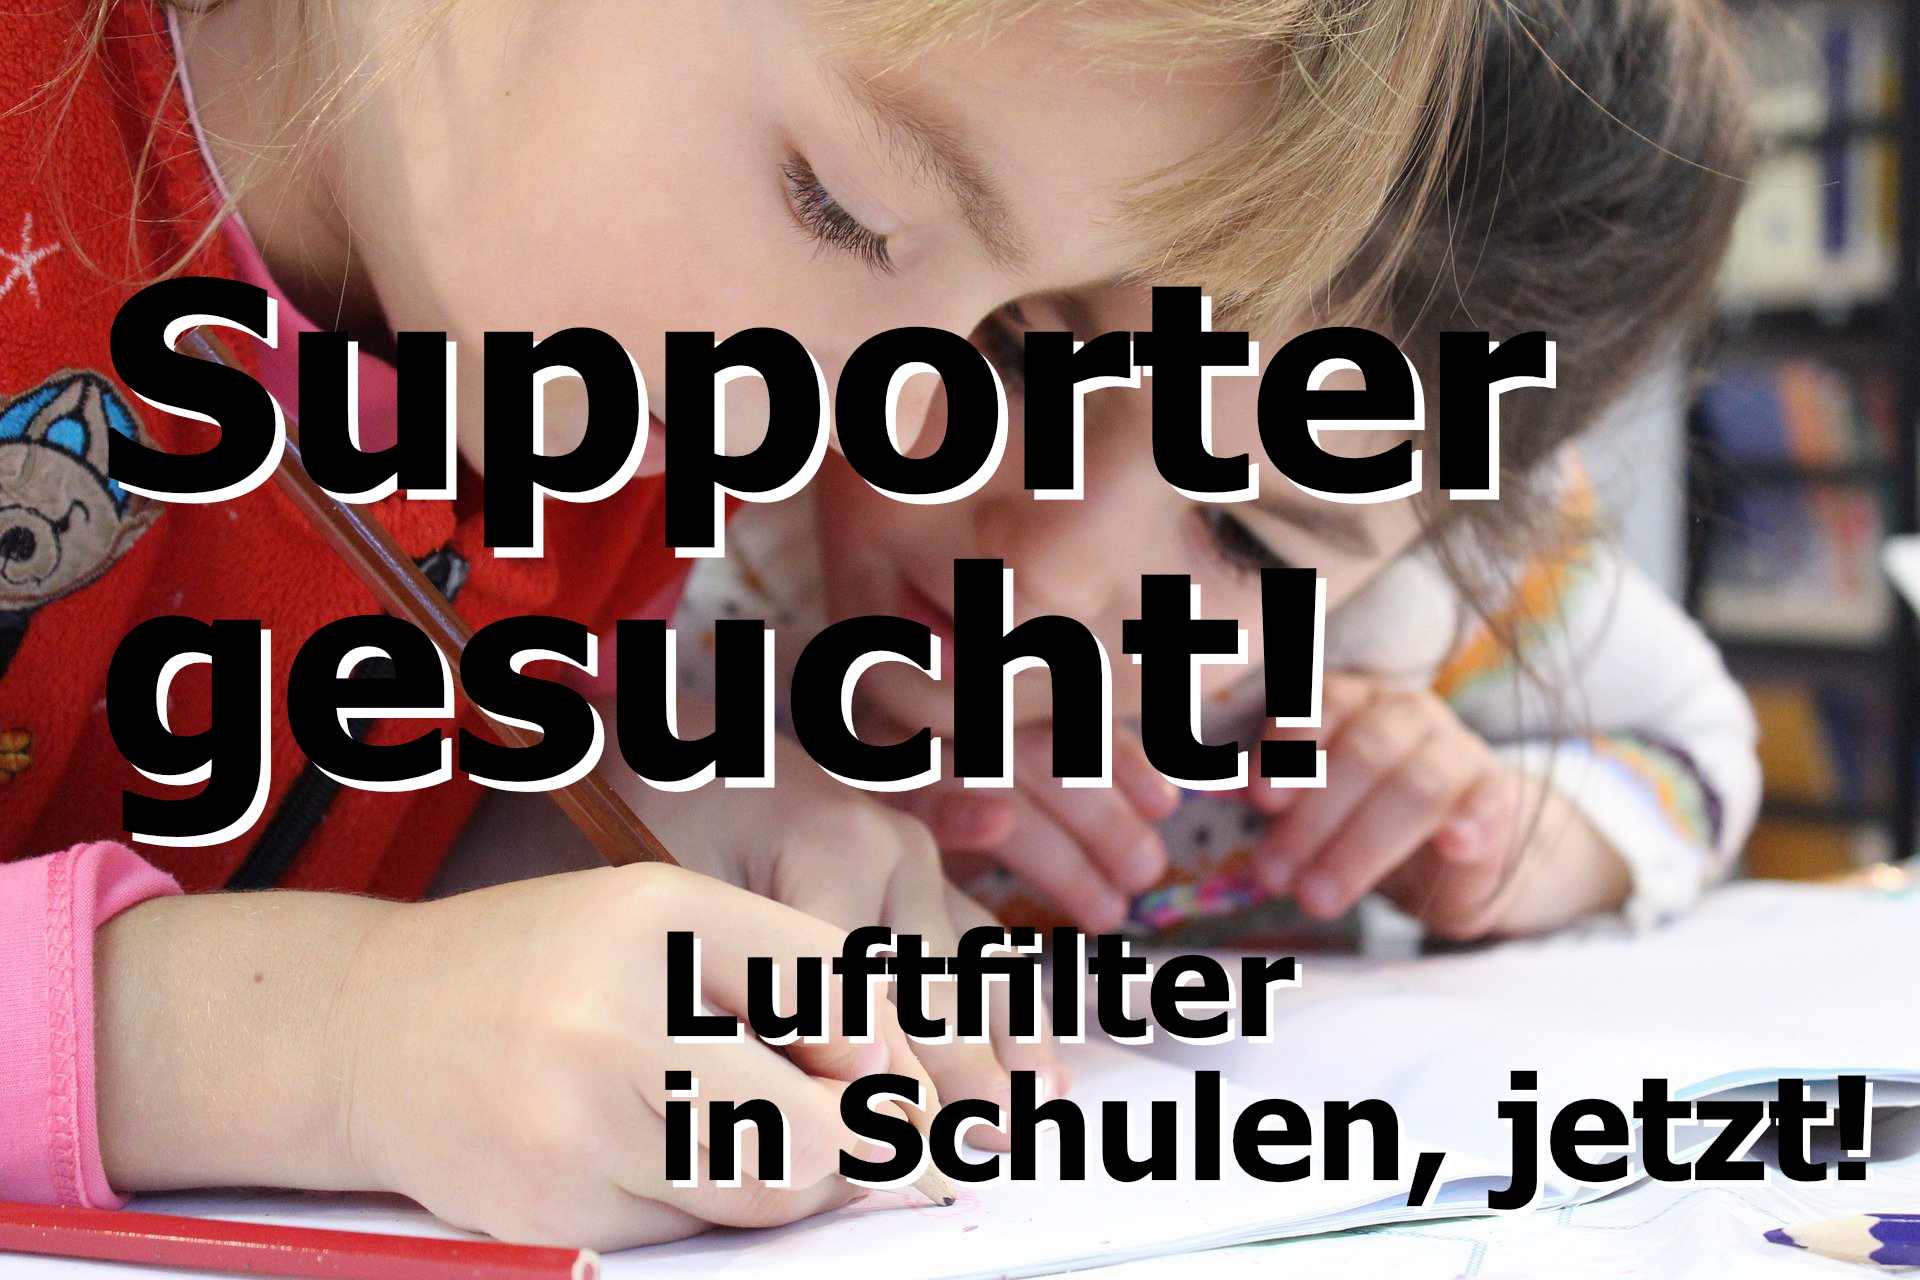 You are currently viewing Supporter gesucht – Luftfilter in Schulen, jetzt!